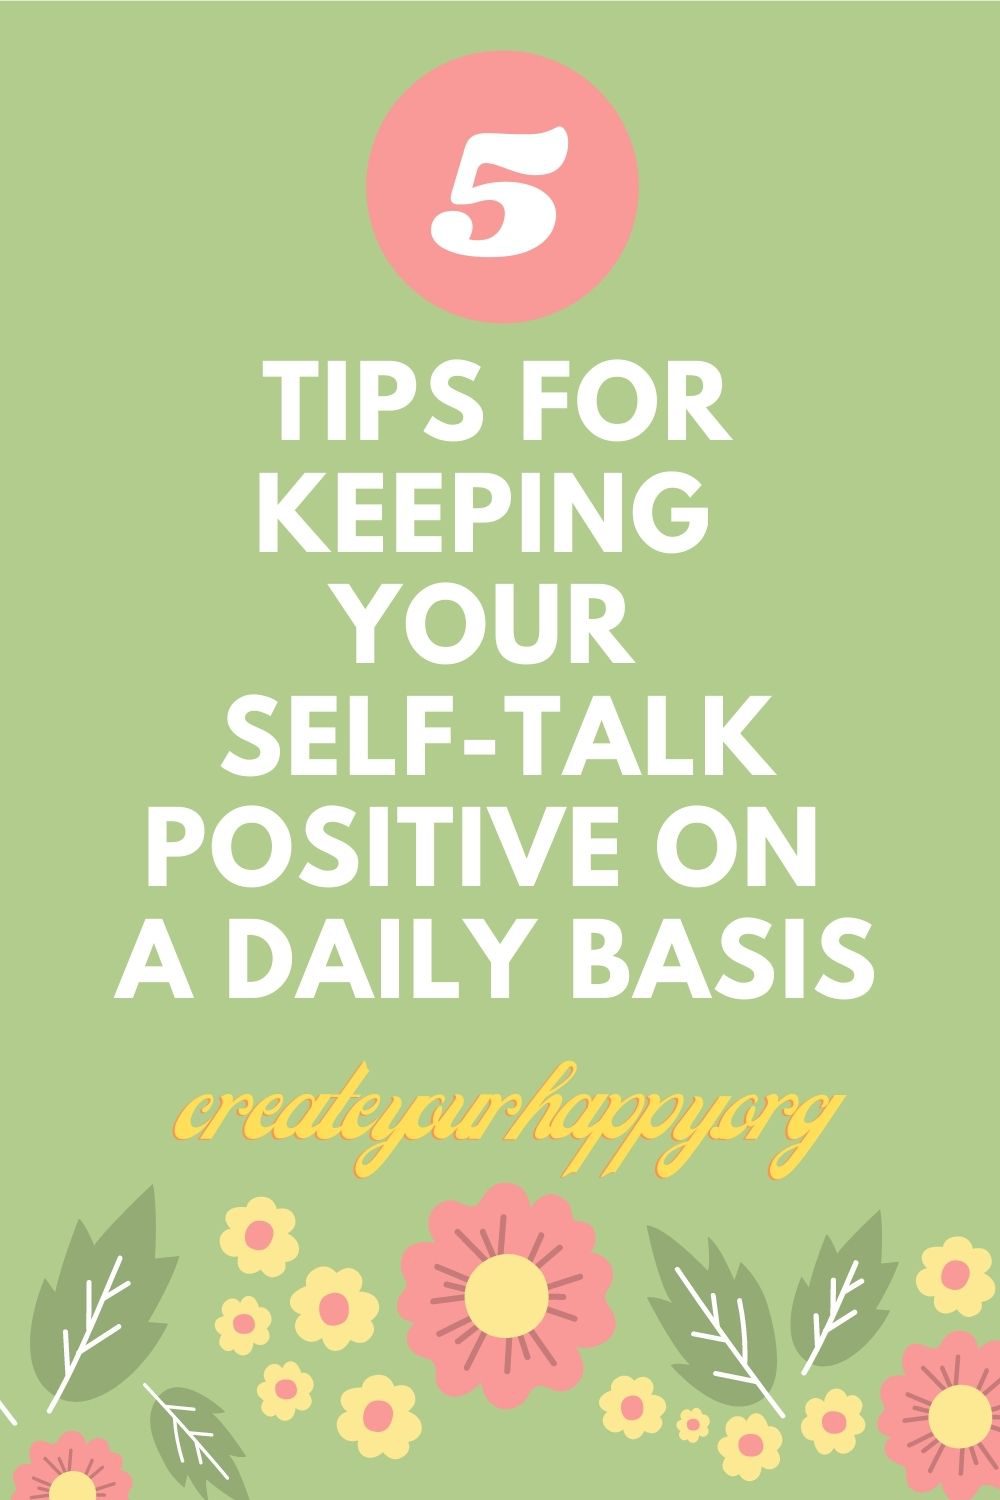 5 Tips for Keeping Your Self-Talk Positive on a Daily Basis